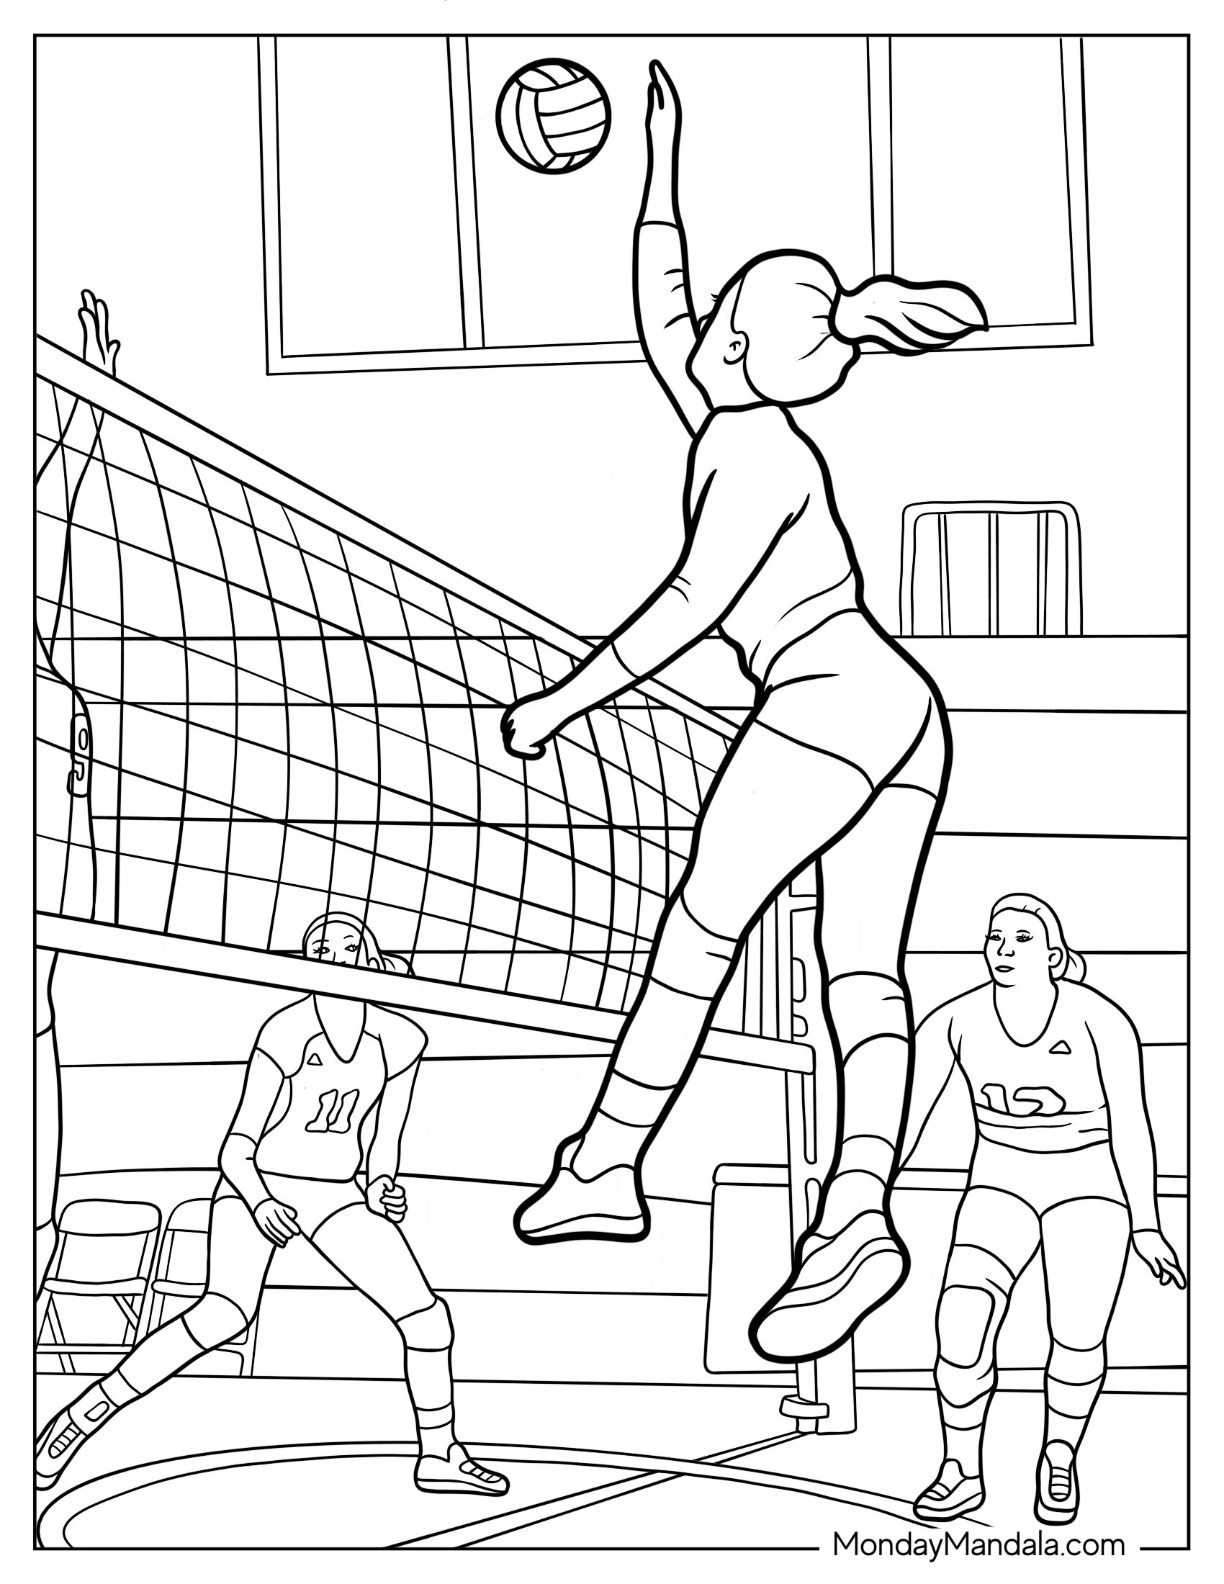 Volleyball coloring pages free pdf printables